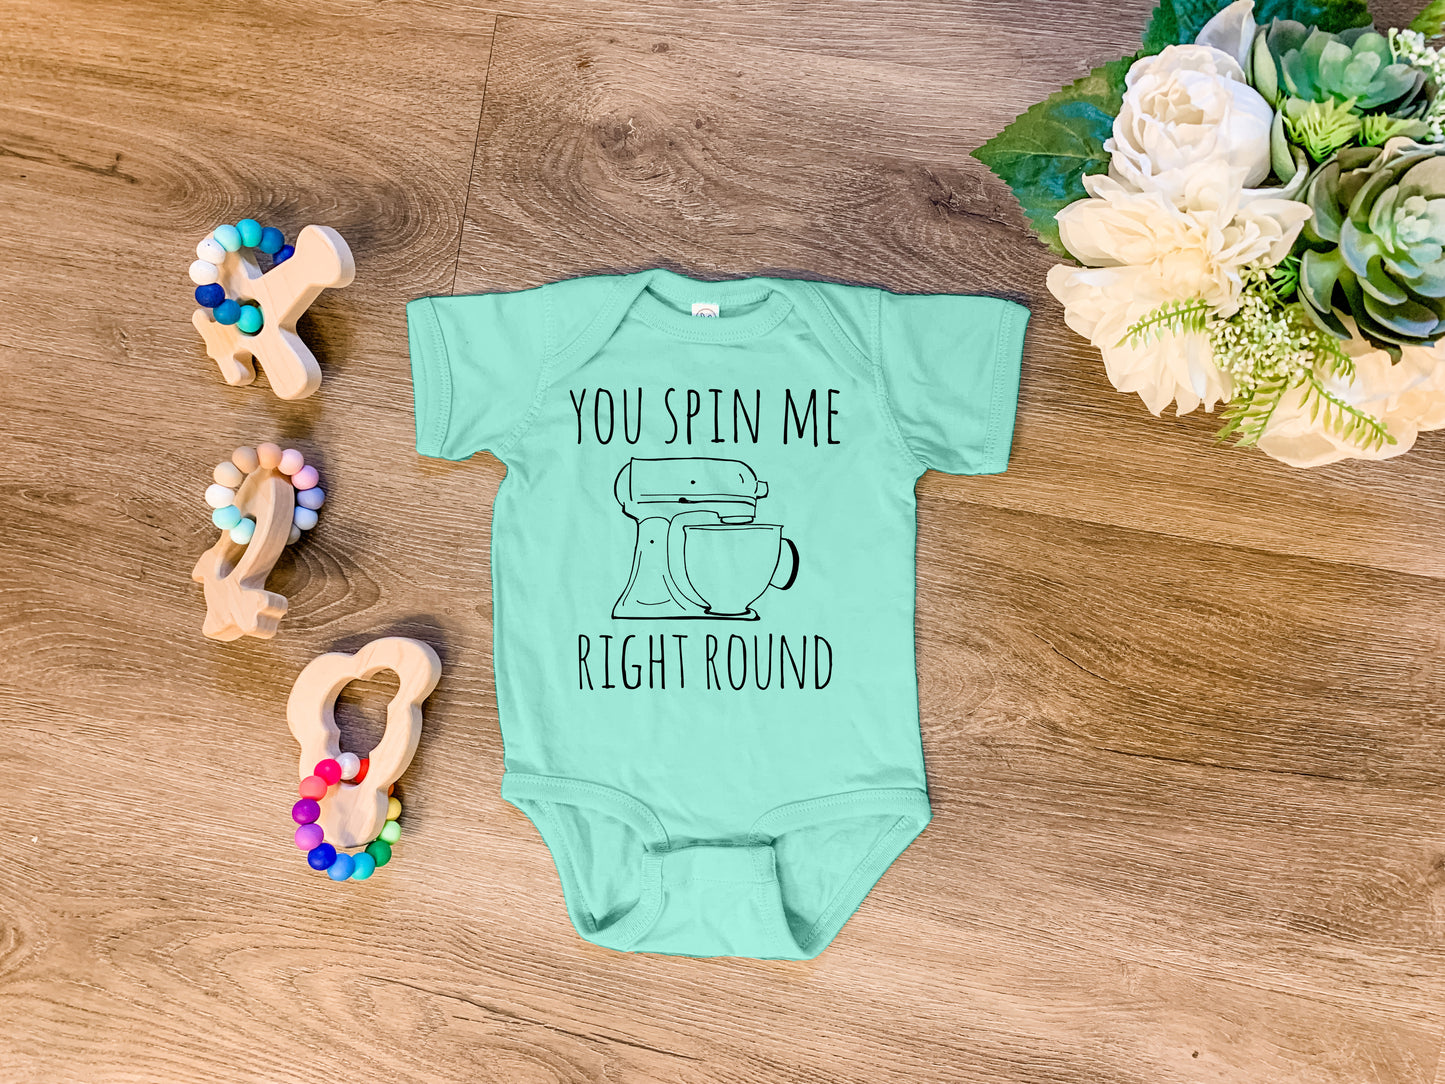 You Spin Me Right Round (Mixer) - Onesie - Heather Gray, Chill, or Lavender